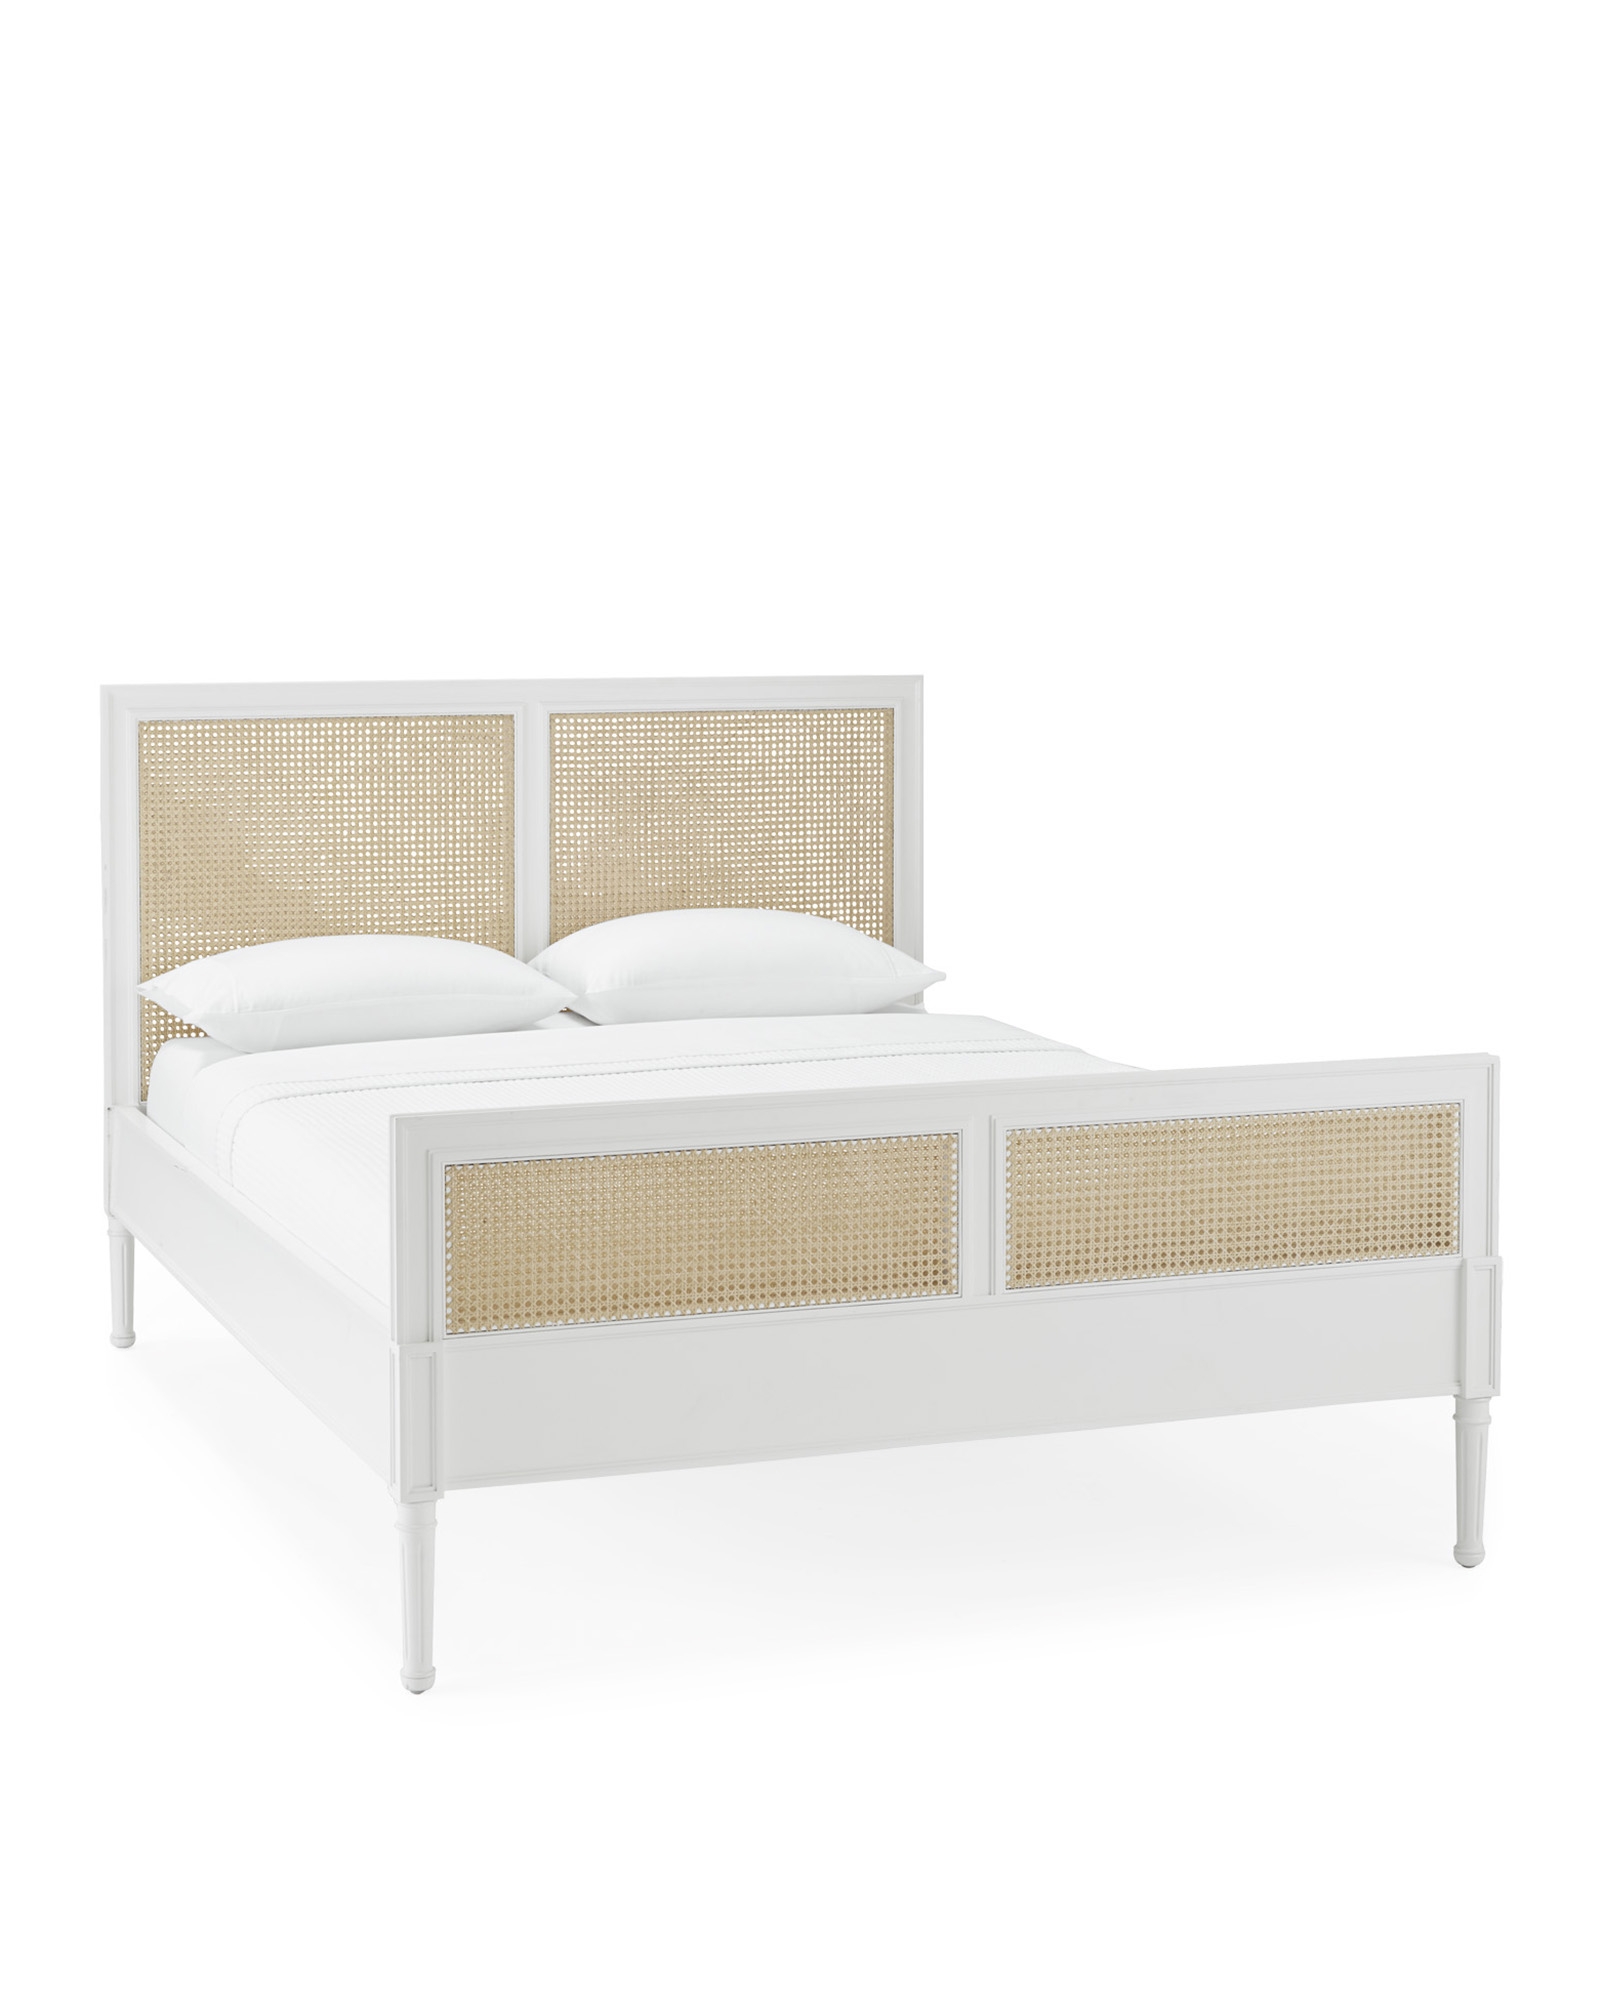 Harbour Cane King Bed - White - Image 0